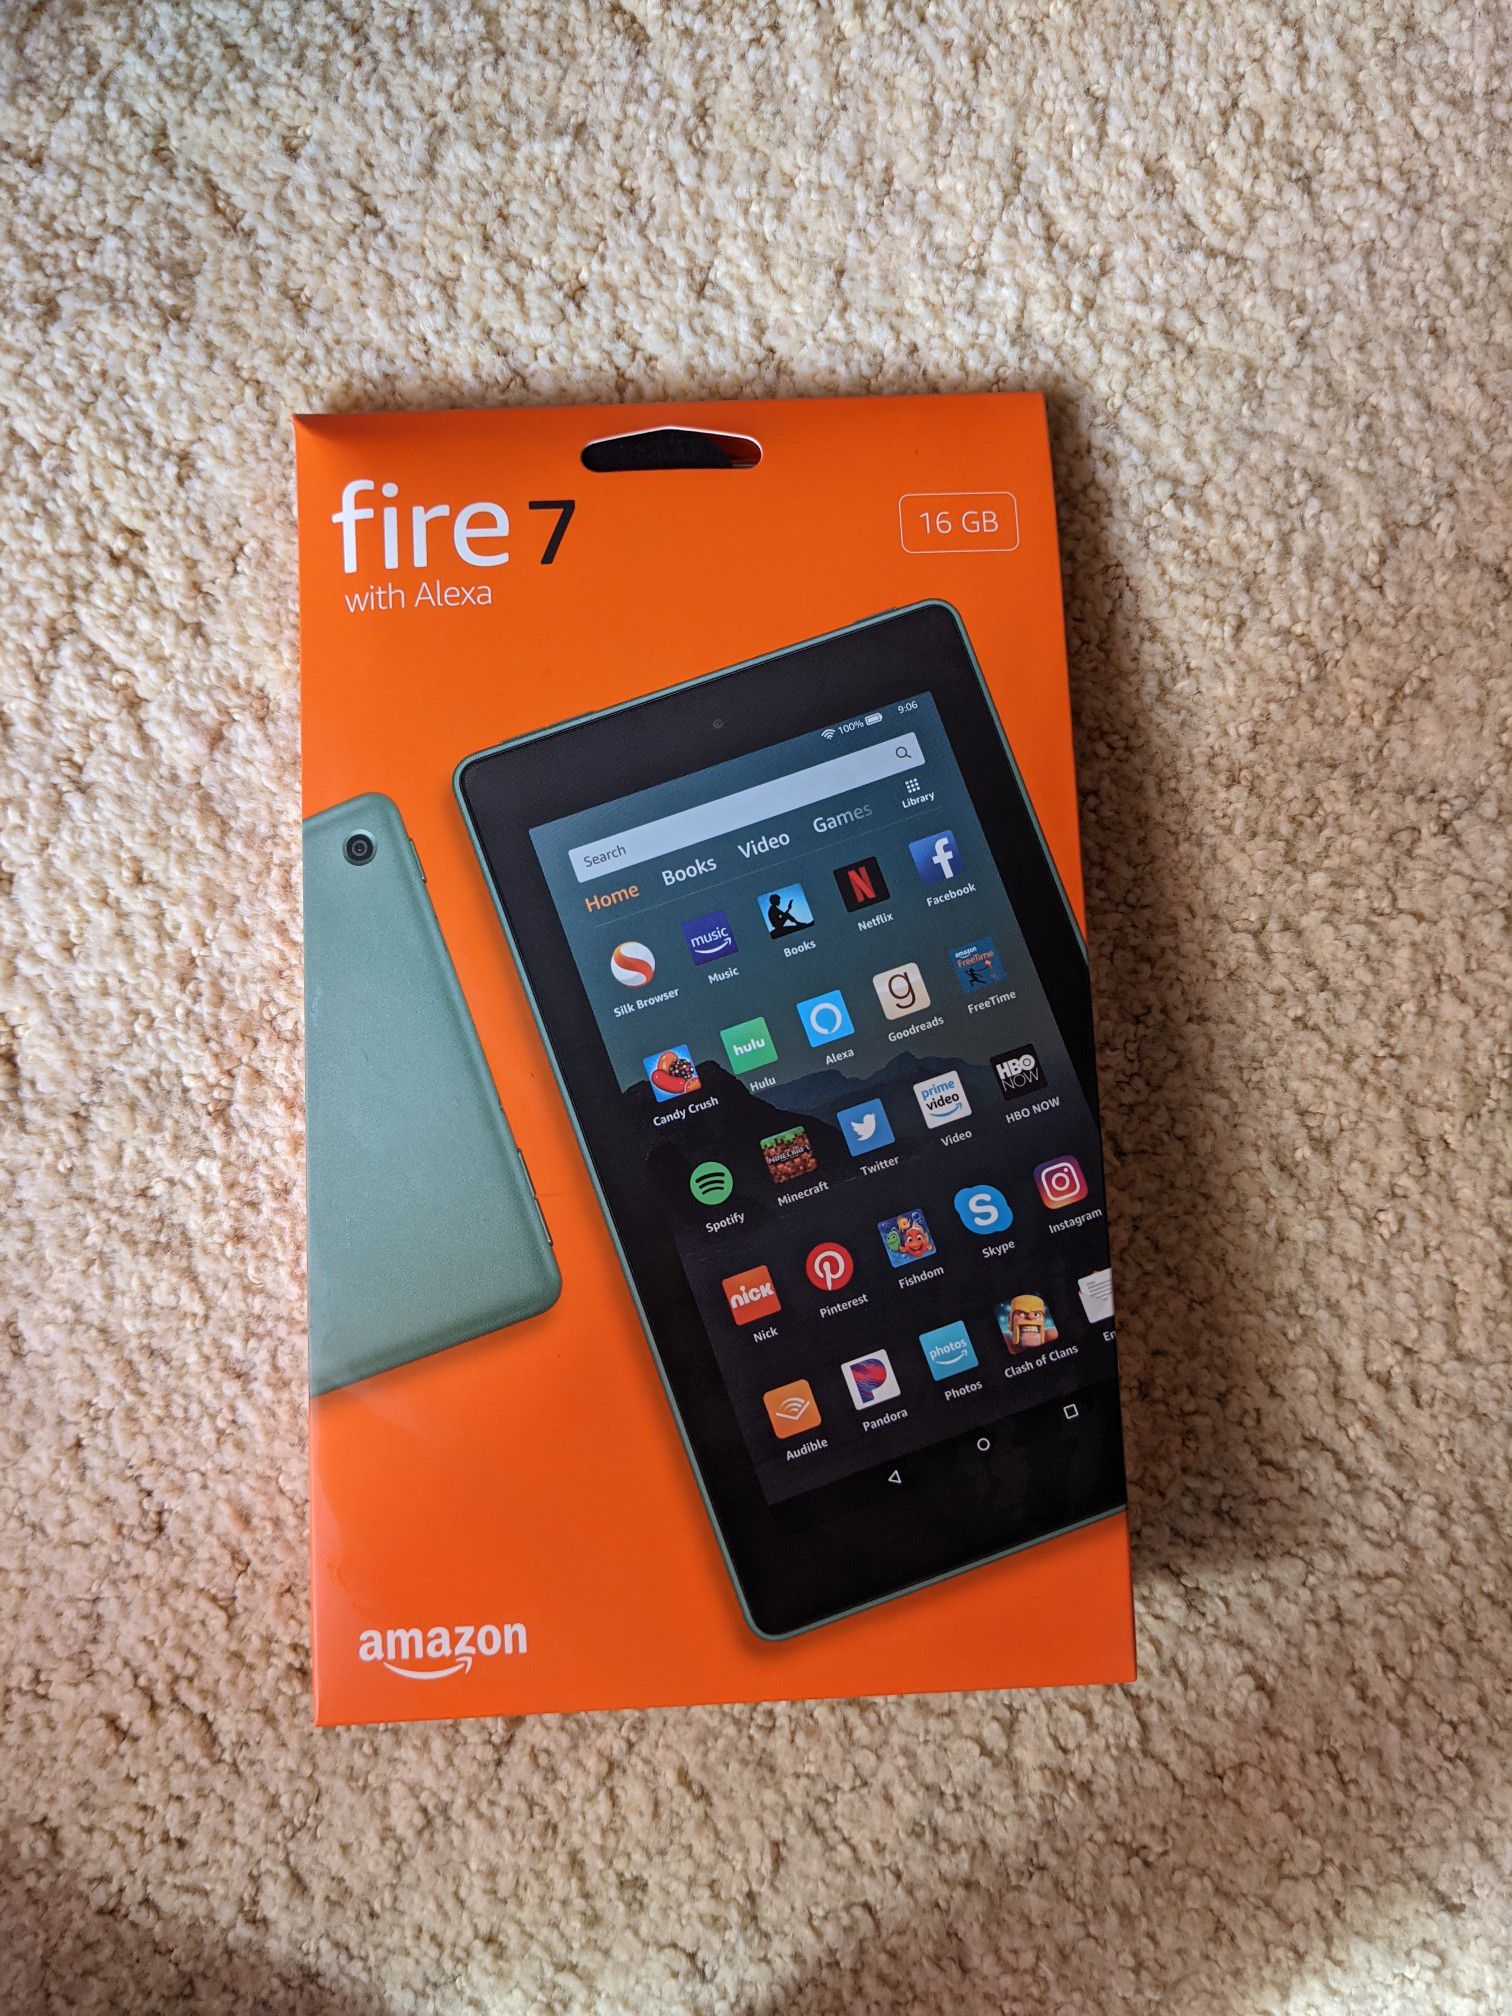 Brand new Amazon Fire 7 Tablet